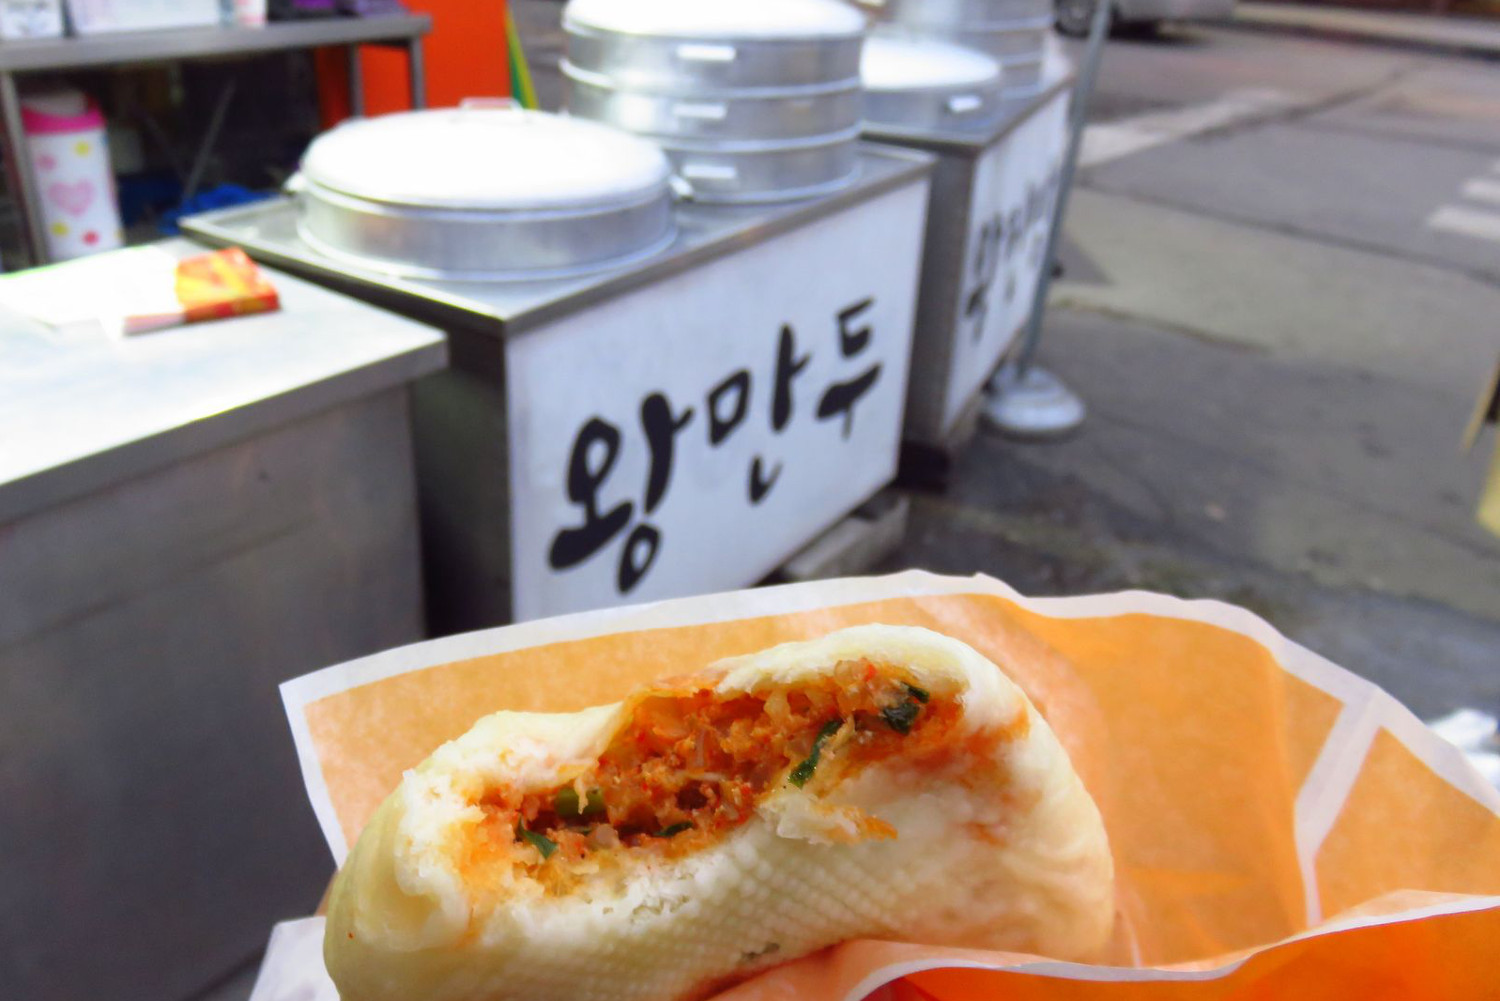 Spicy kimchi dumplings, a street food treat. Image by Phillip Tang / Lonely Planet